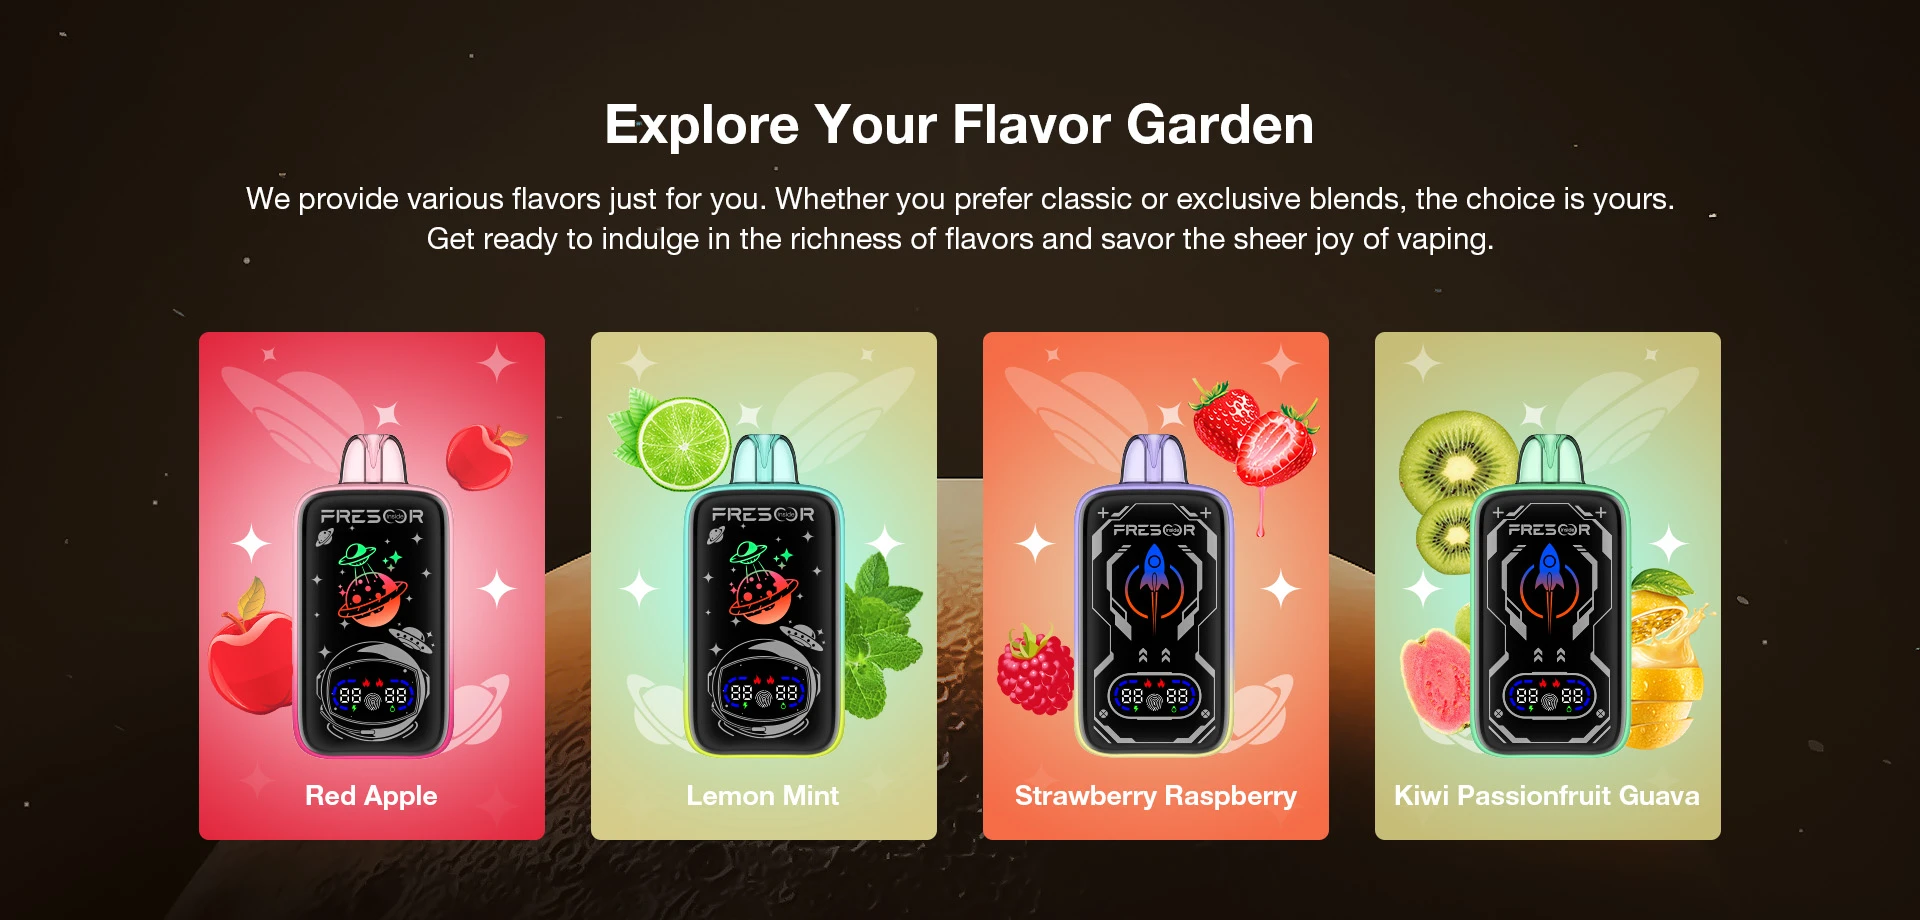 Explore Your Flavor Garden We provide various flavors just for you. Whether you prefer classic or exclusive blends, the choice is yours. Get ready to indulge in the richness of flavors and savor the sheer joy of vaping.